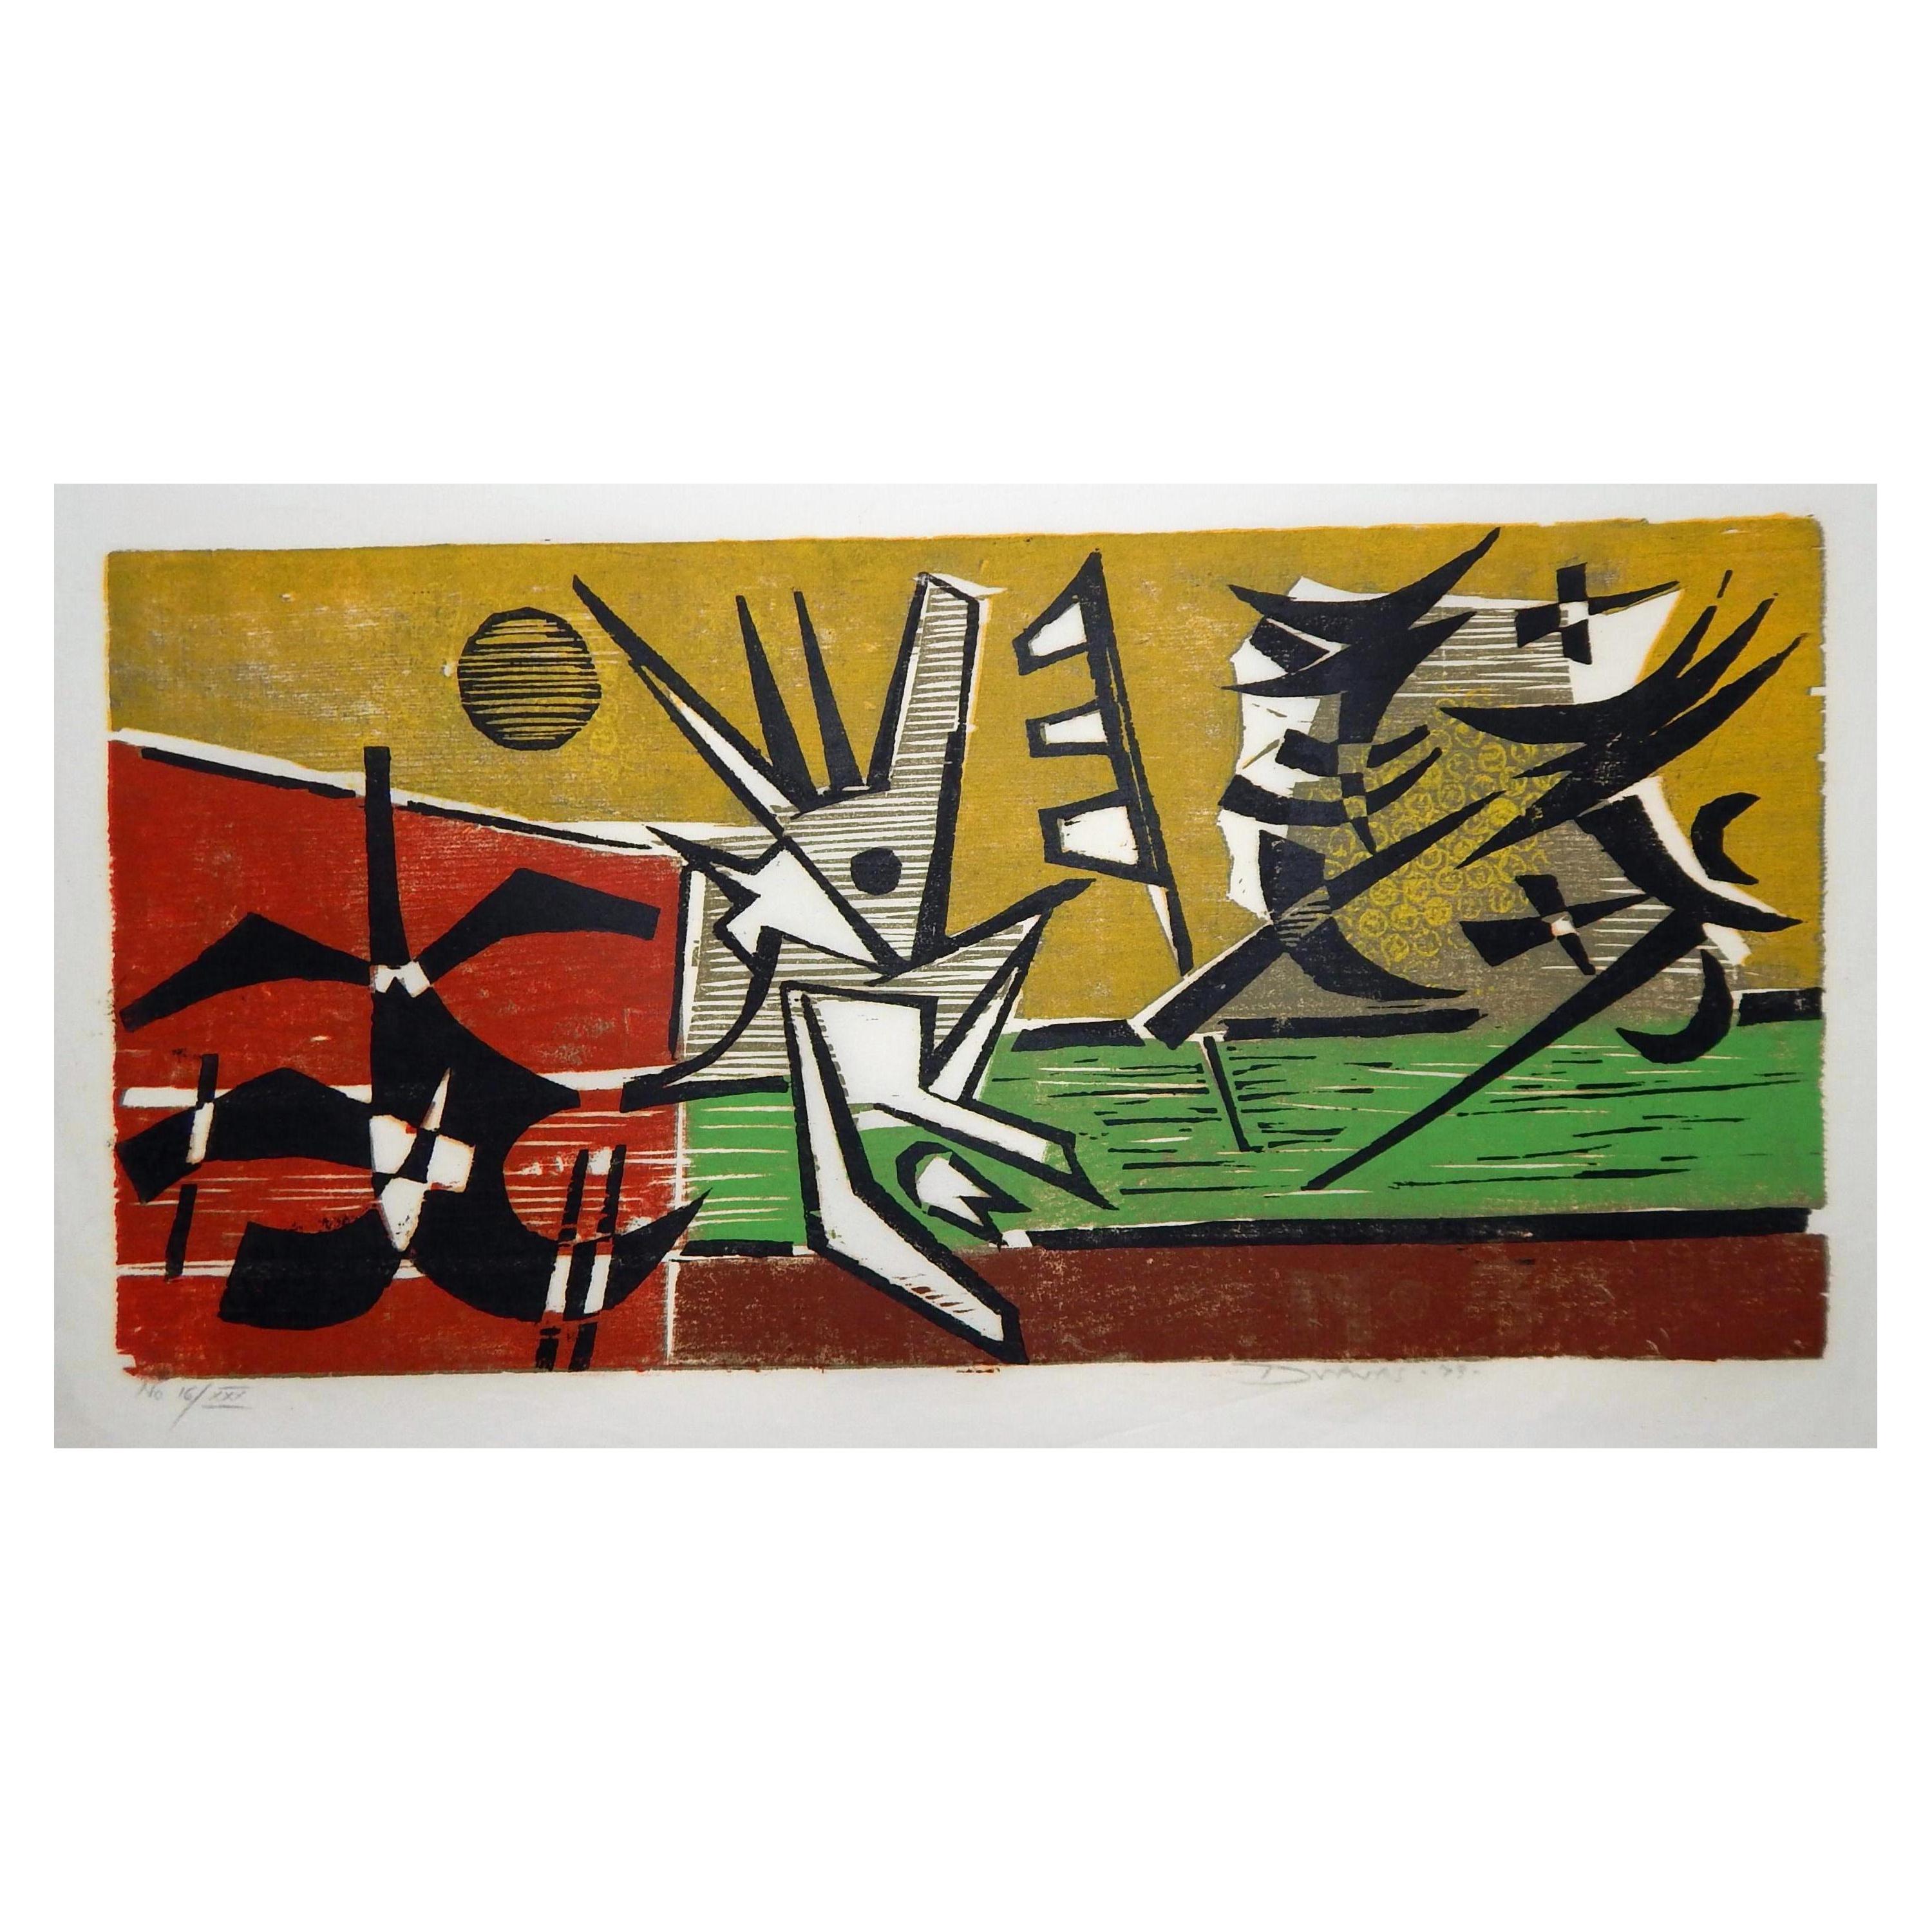 Werner Drewes Bauhaus Artist Color Woodblock, 1973, At Play No. 3 'Fight'